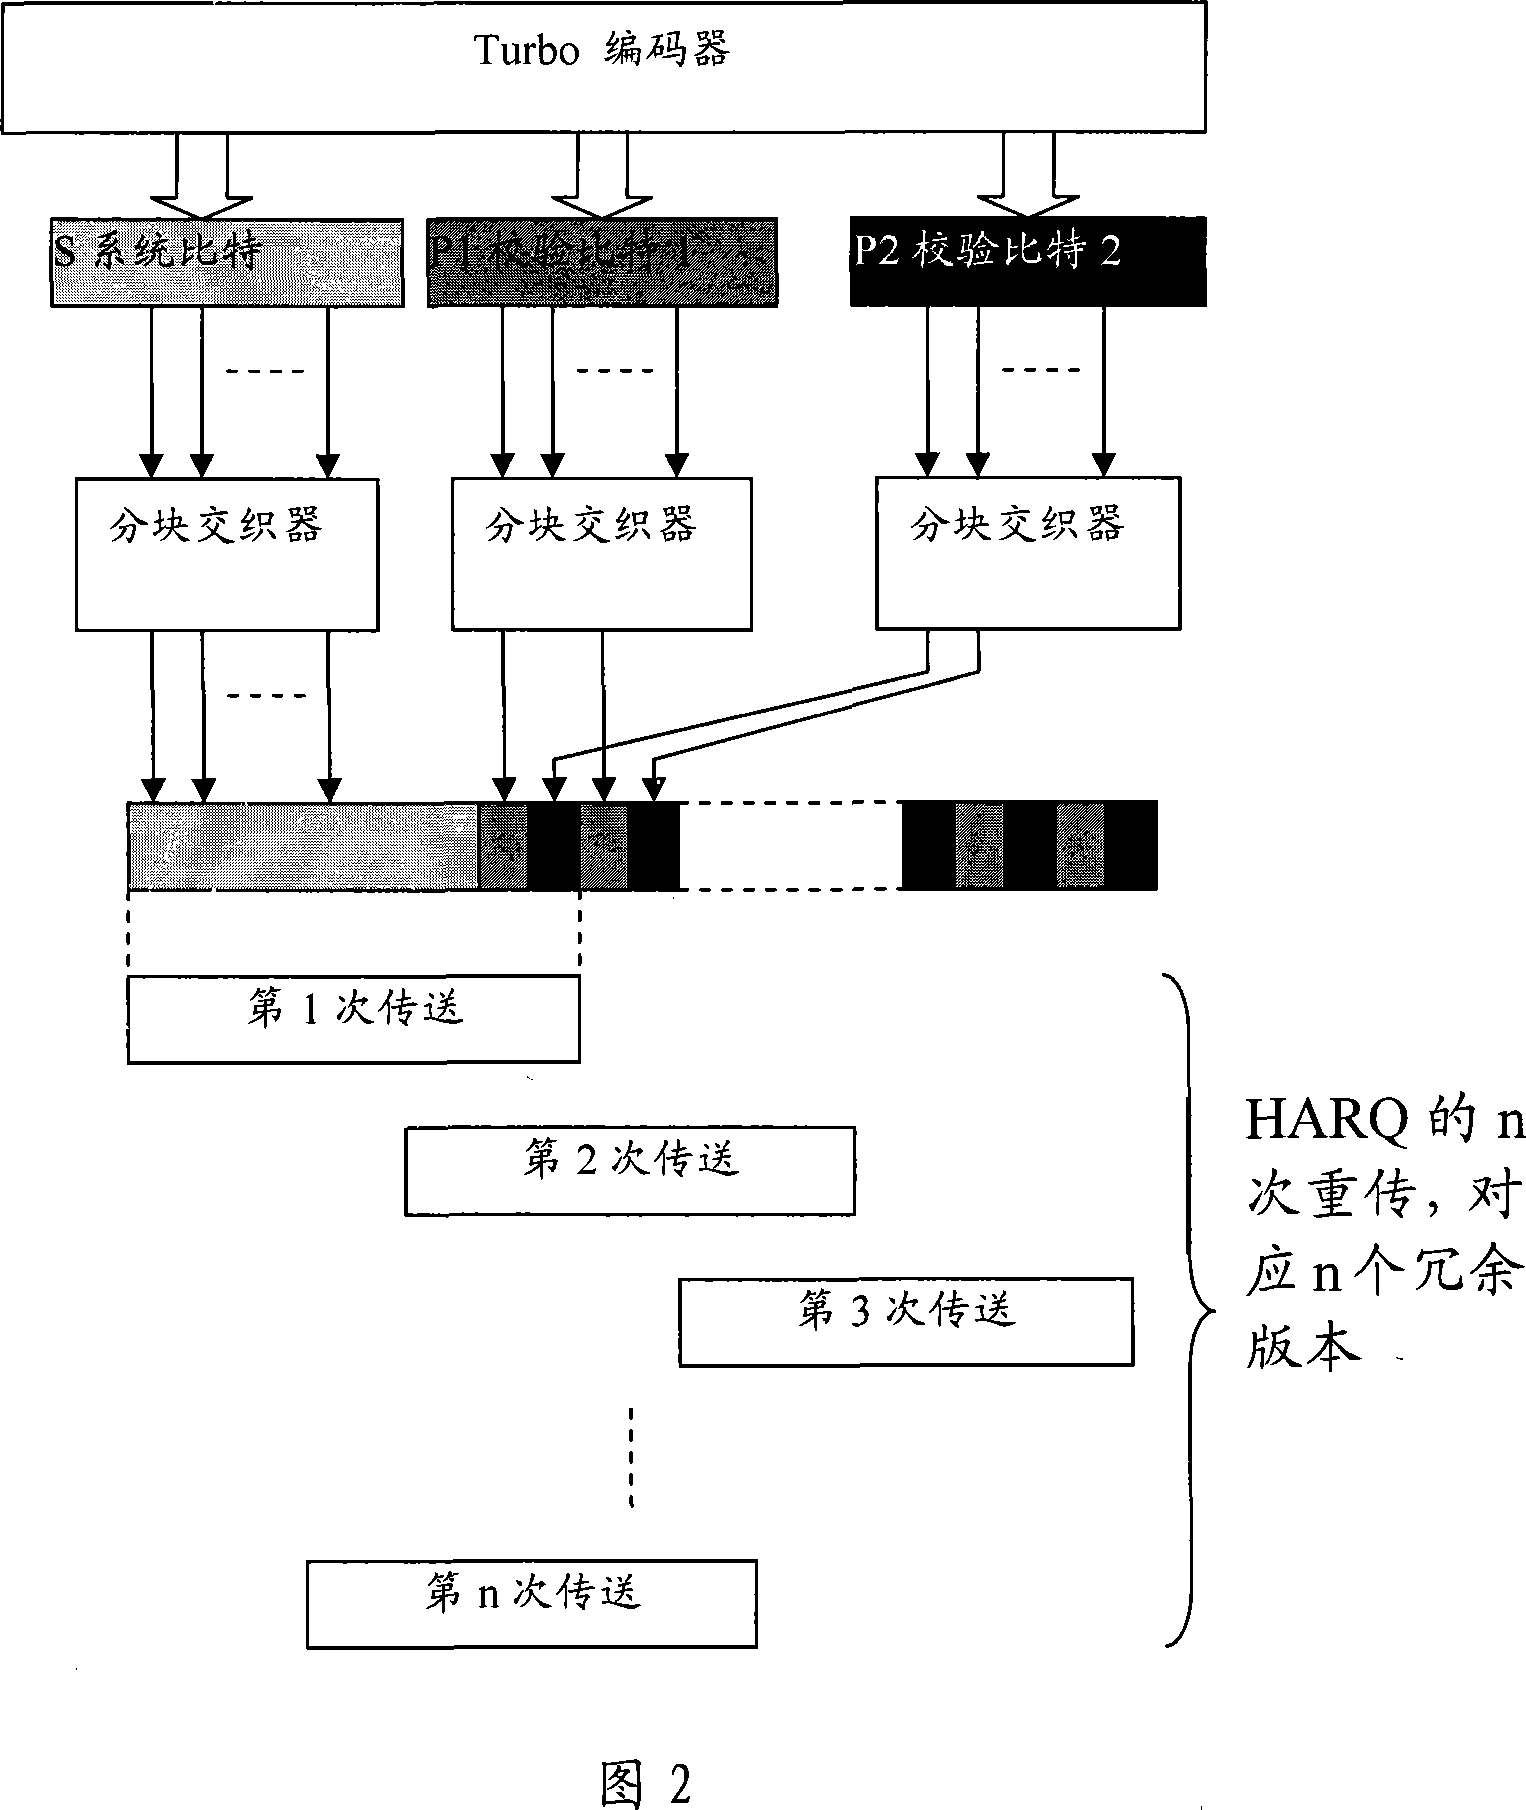 Method for generating turbo-code block intersection and HARQ packet